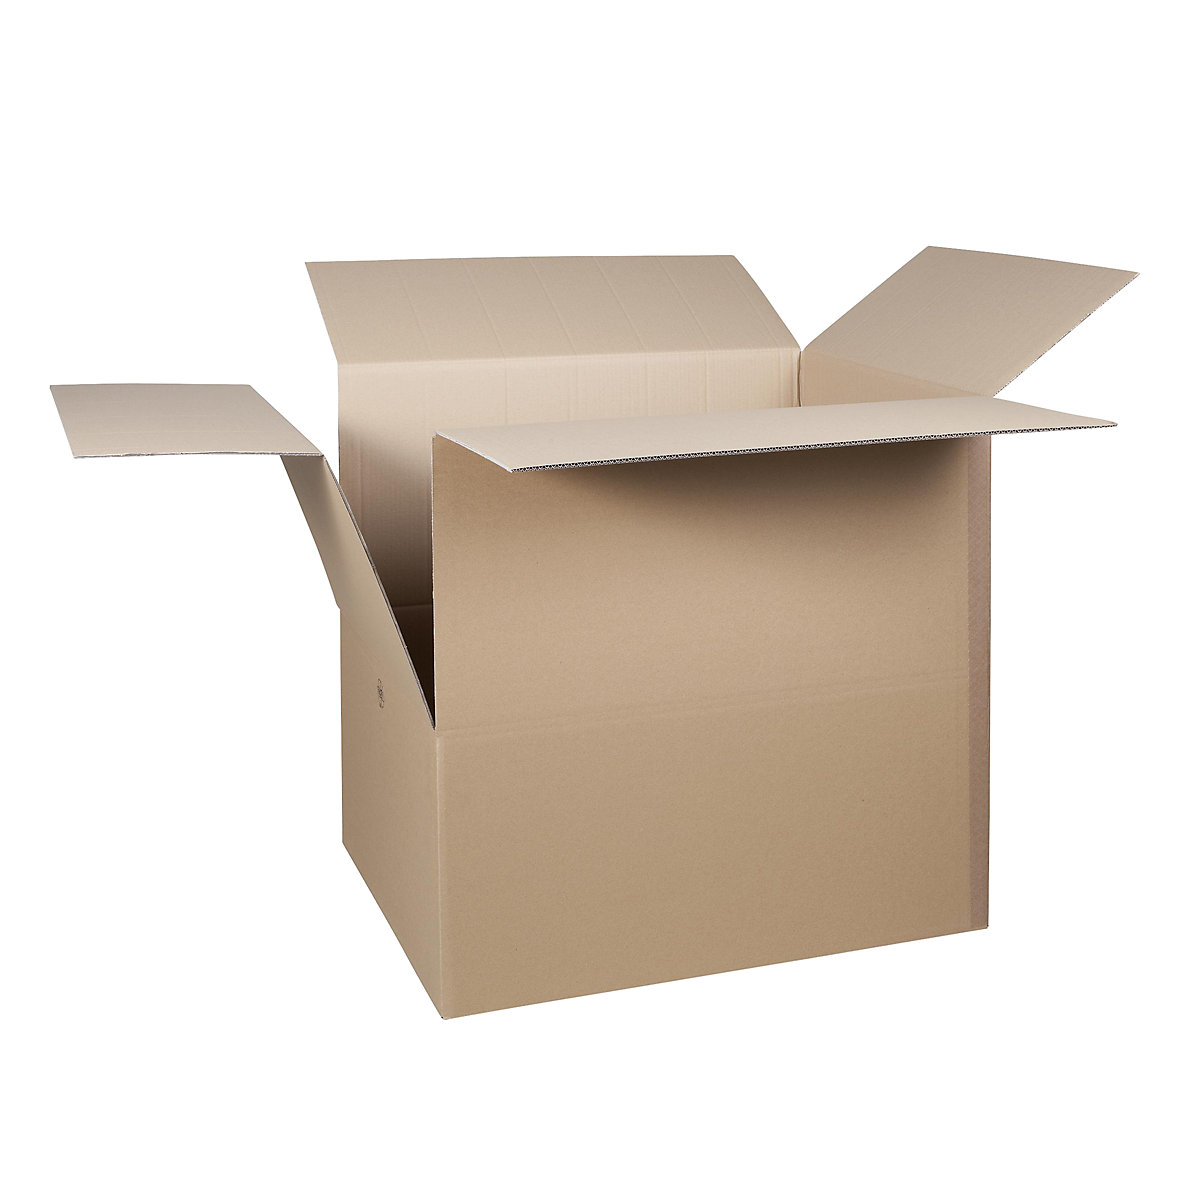 Folding cardboard box, FEFCO 0201, made of double fluted cardboard, internal dimensions 780 x 580 x 750 mm, pack of 50-1